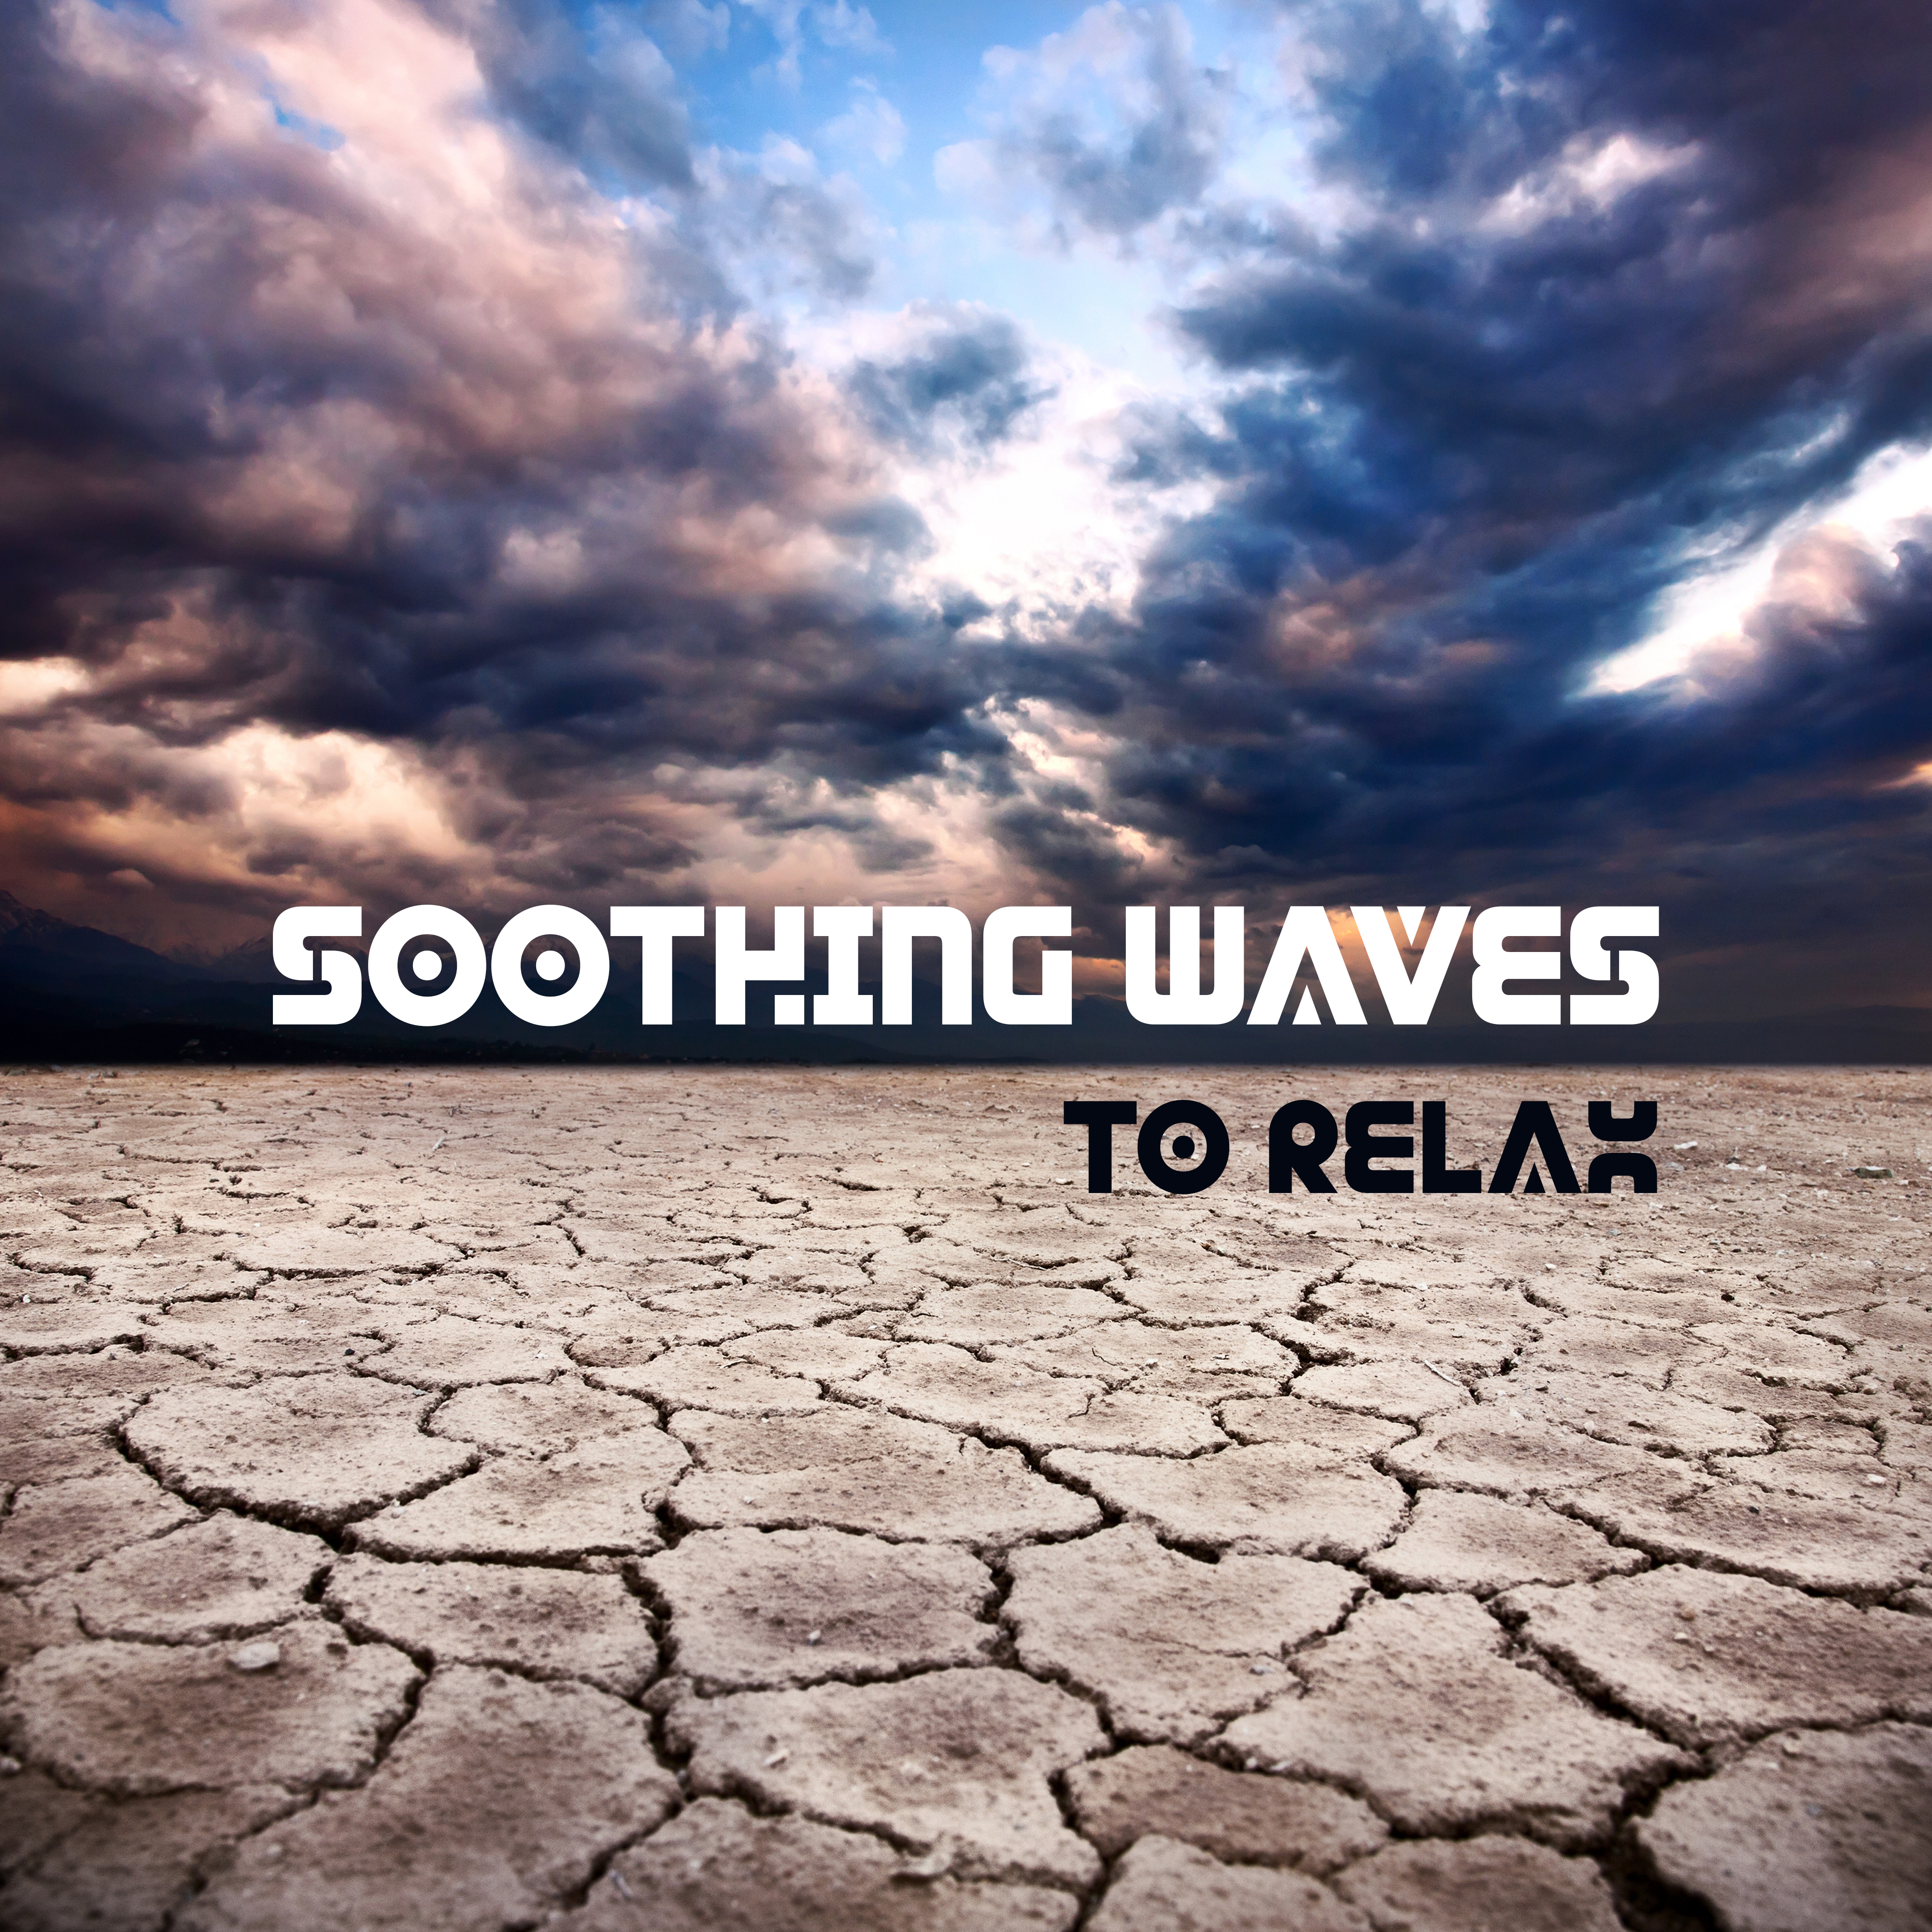 Soothing Waves to Relax